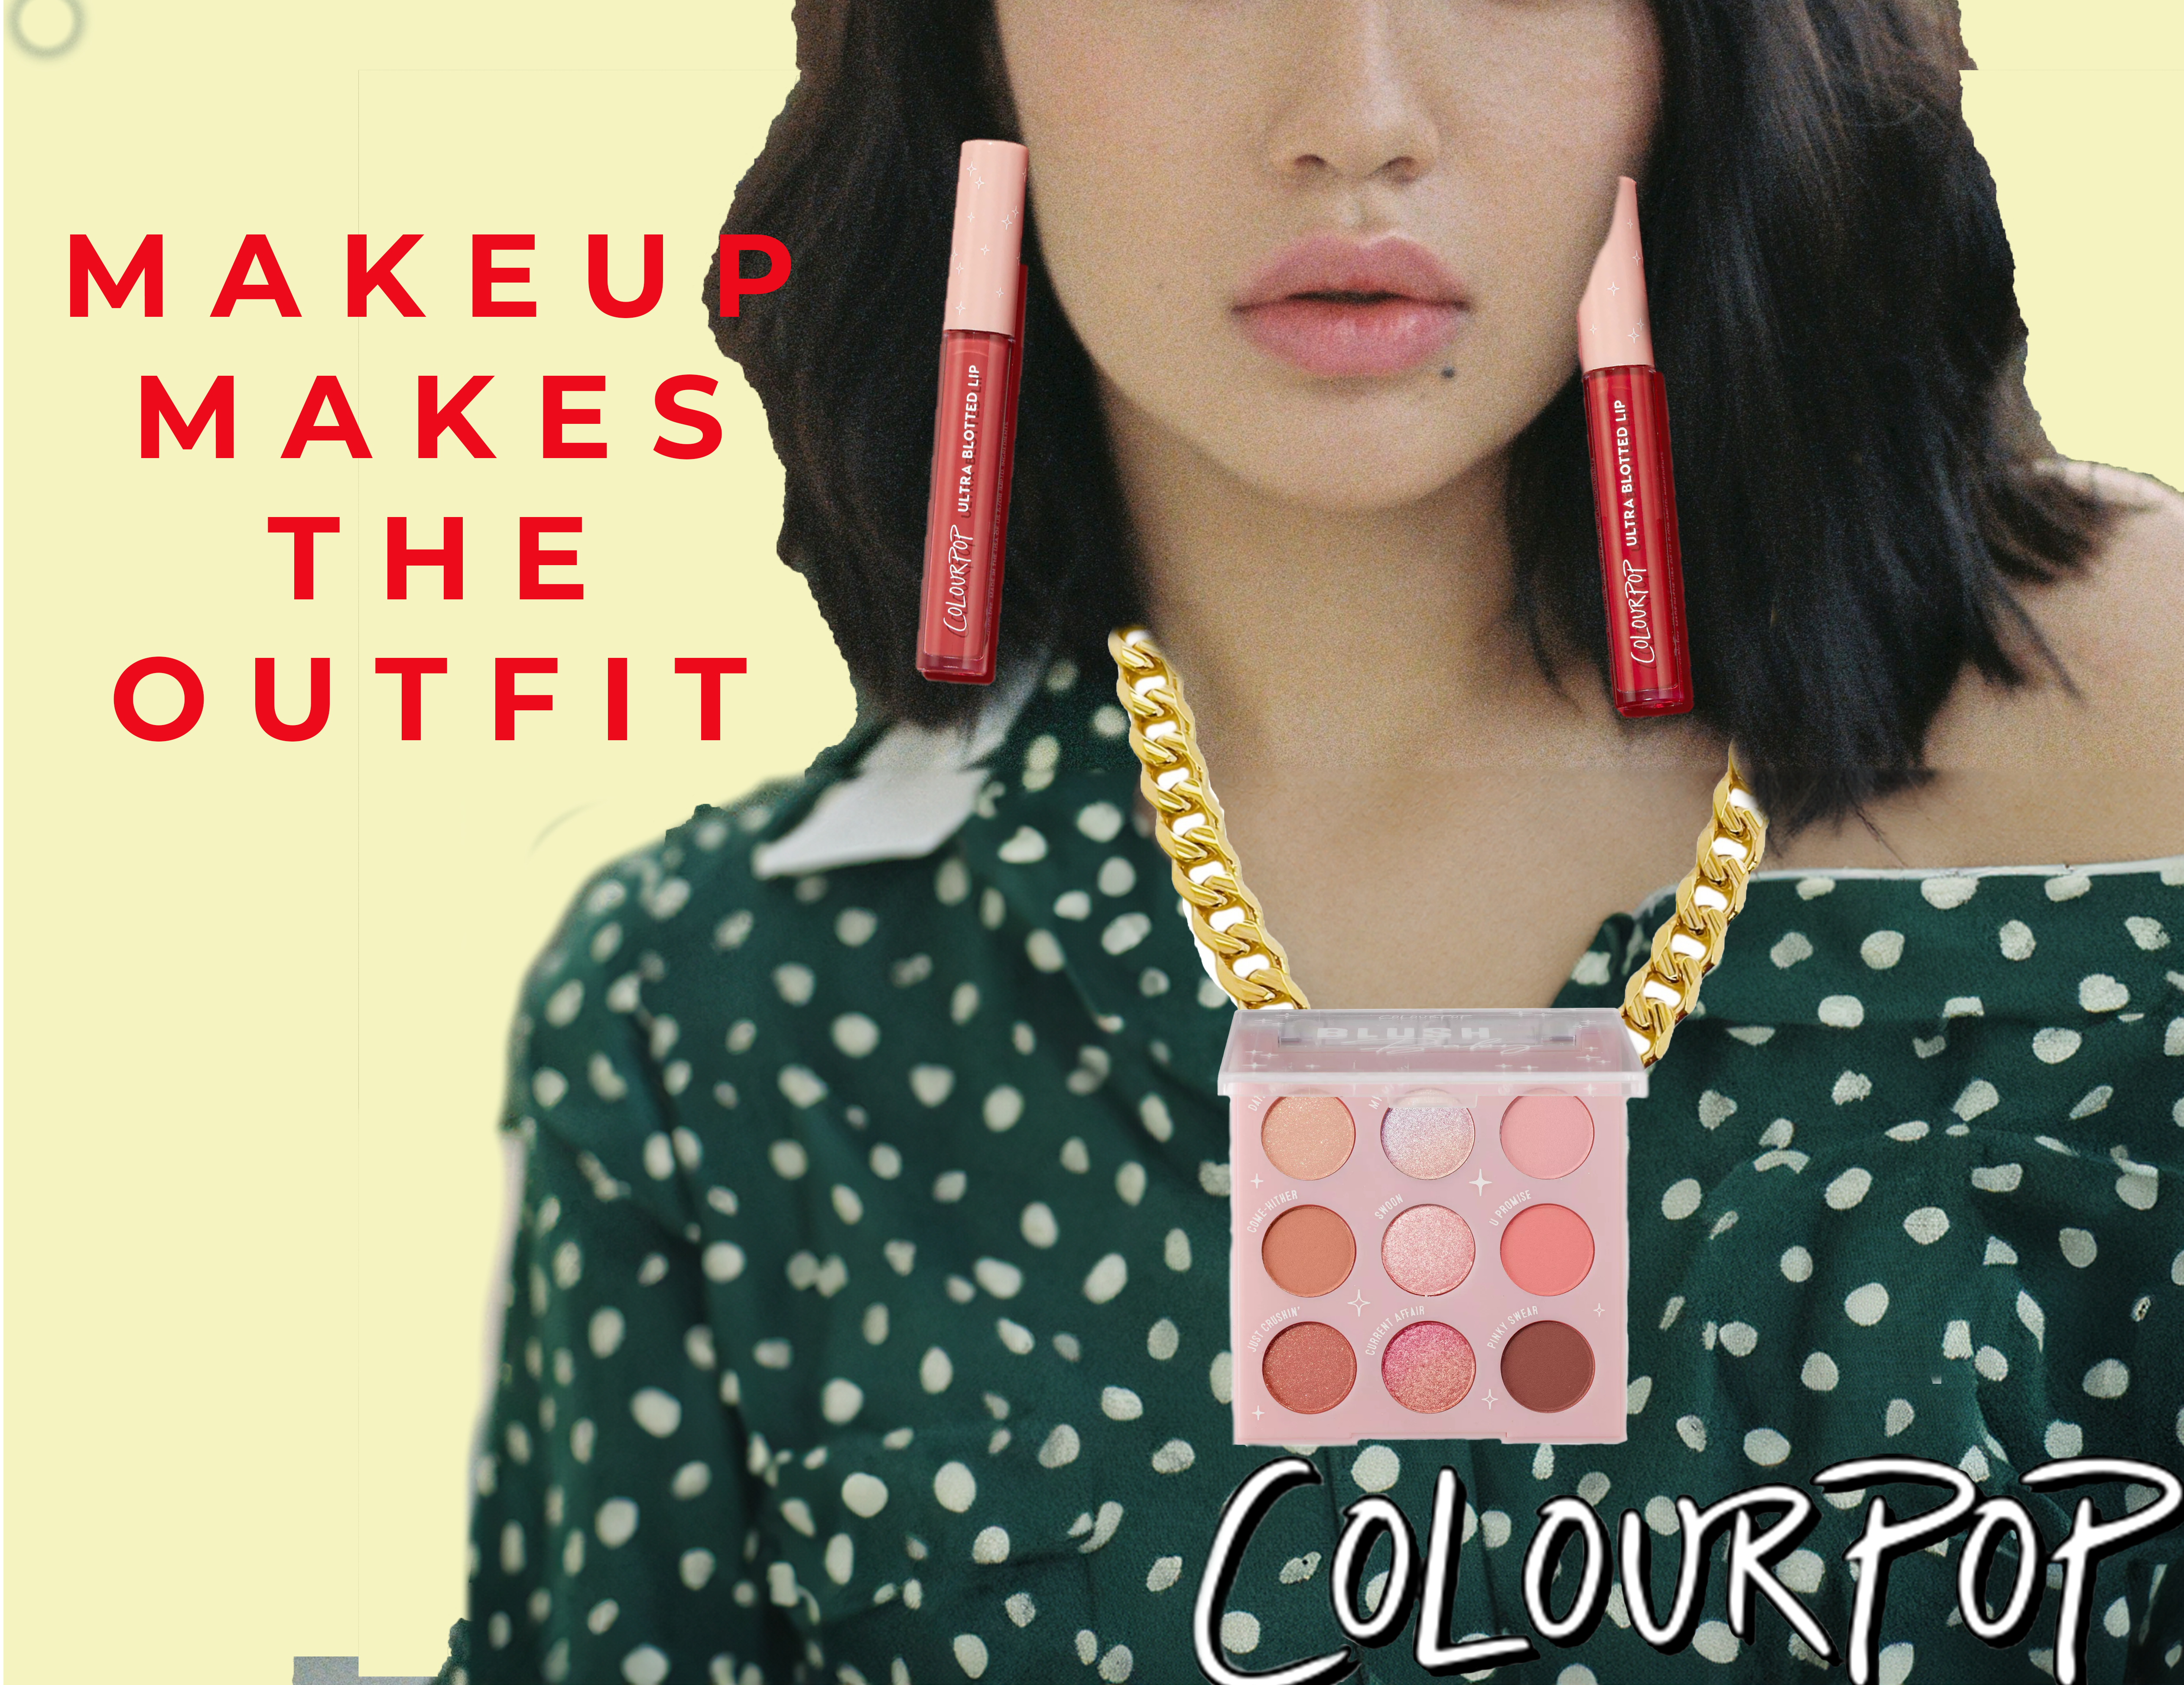 colourpop ad with model with dark hair wearing lipstick for earings and a pallet for necklace, with the text makeup makes the outfit